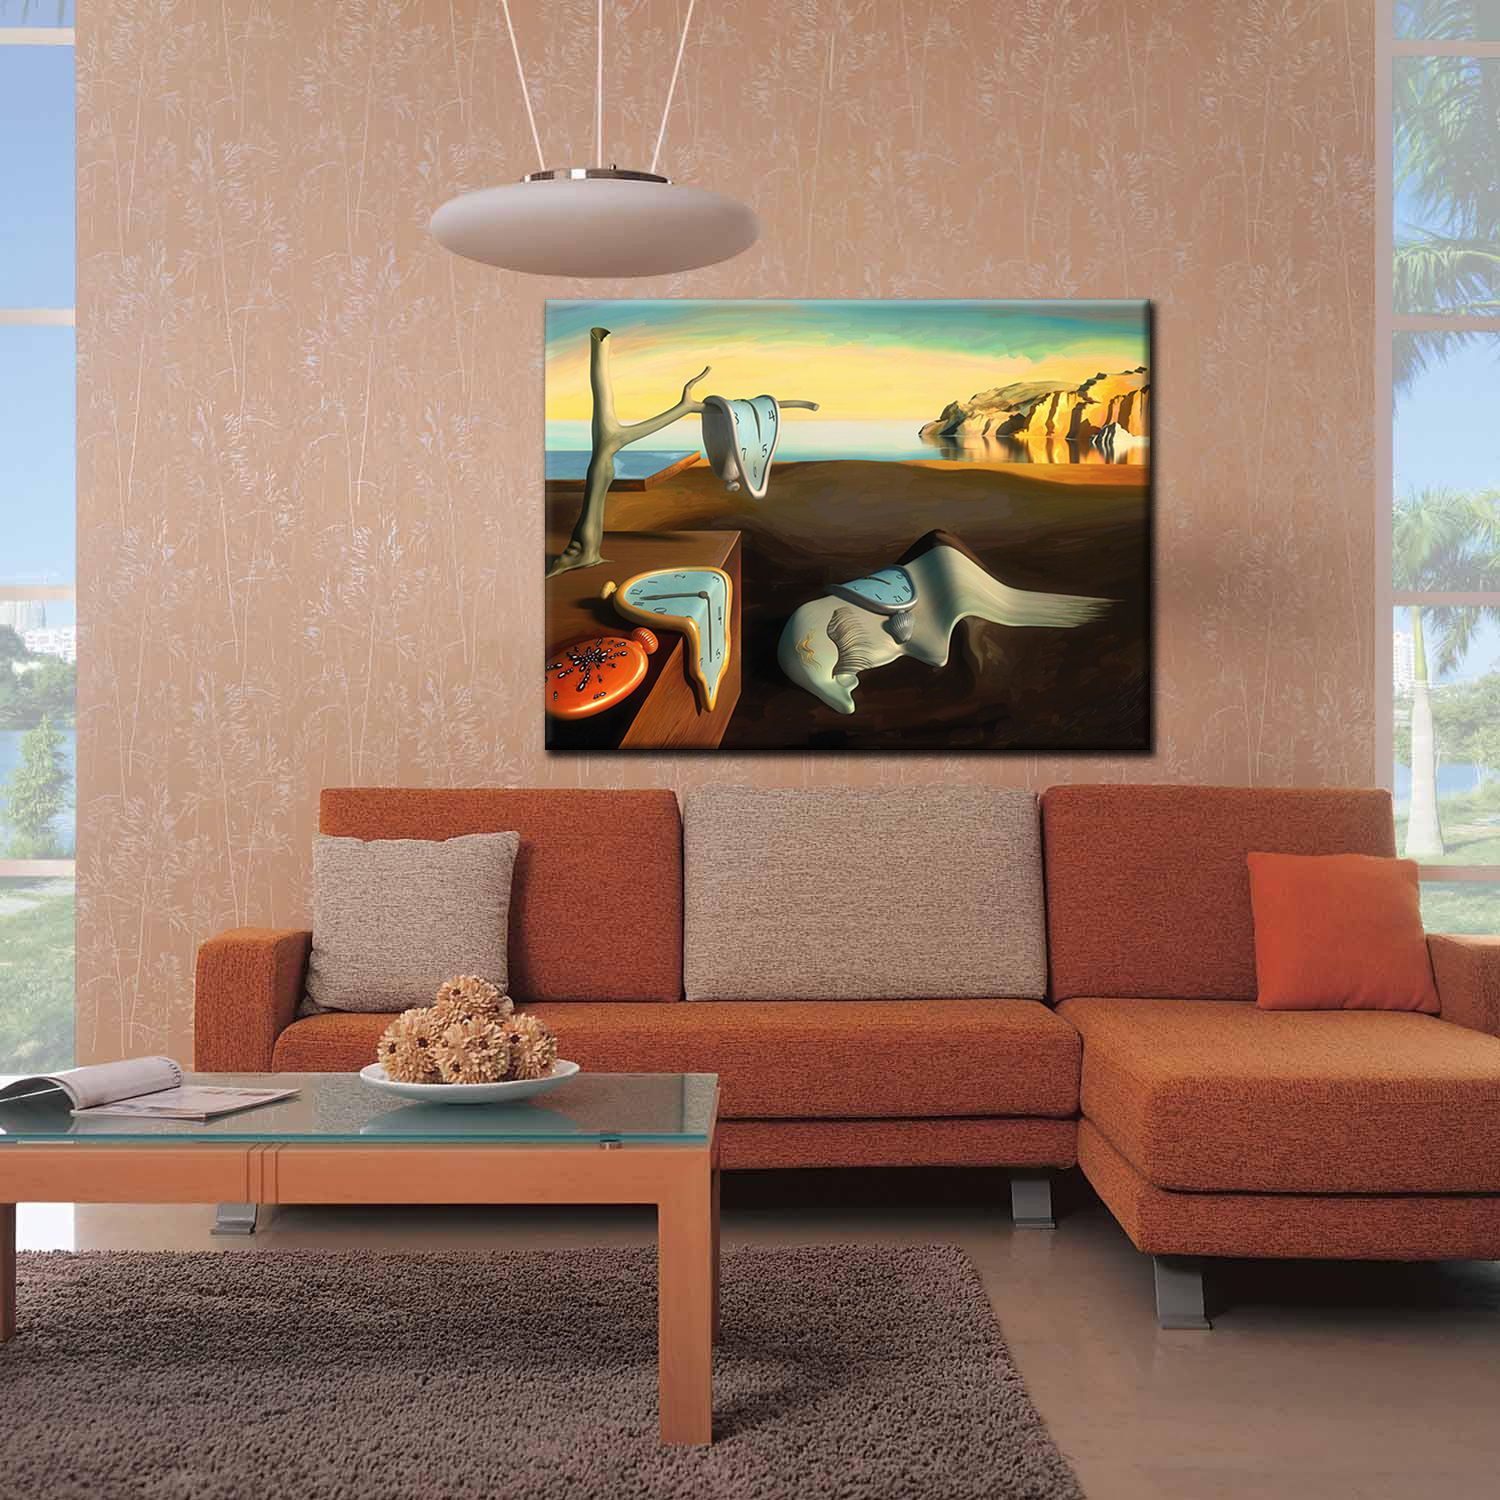 Salvador Dali Wall Art Dalí Persistence of Time Framed Painting Canvas Art For Bedroom Livingroom Decoration Ready to Hang - image 2 of 7